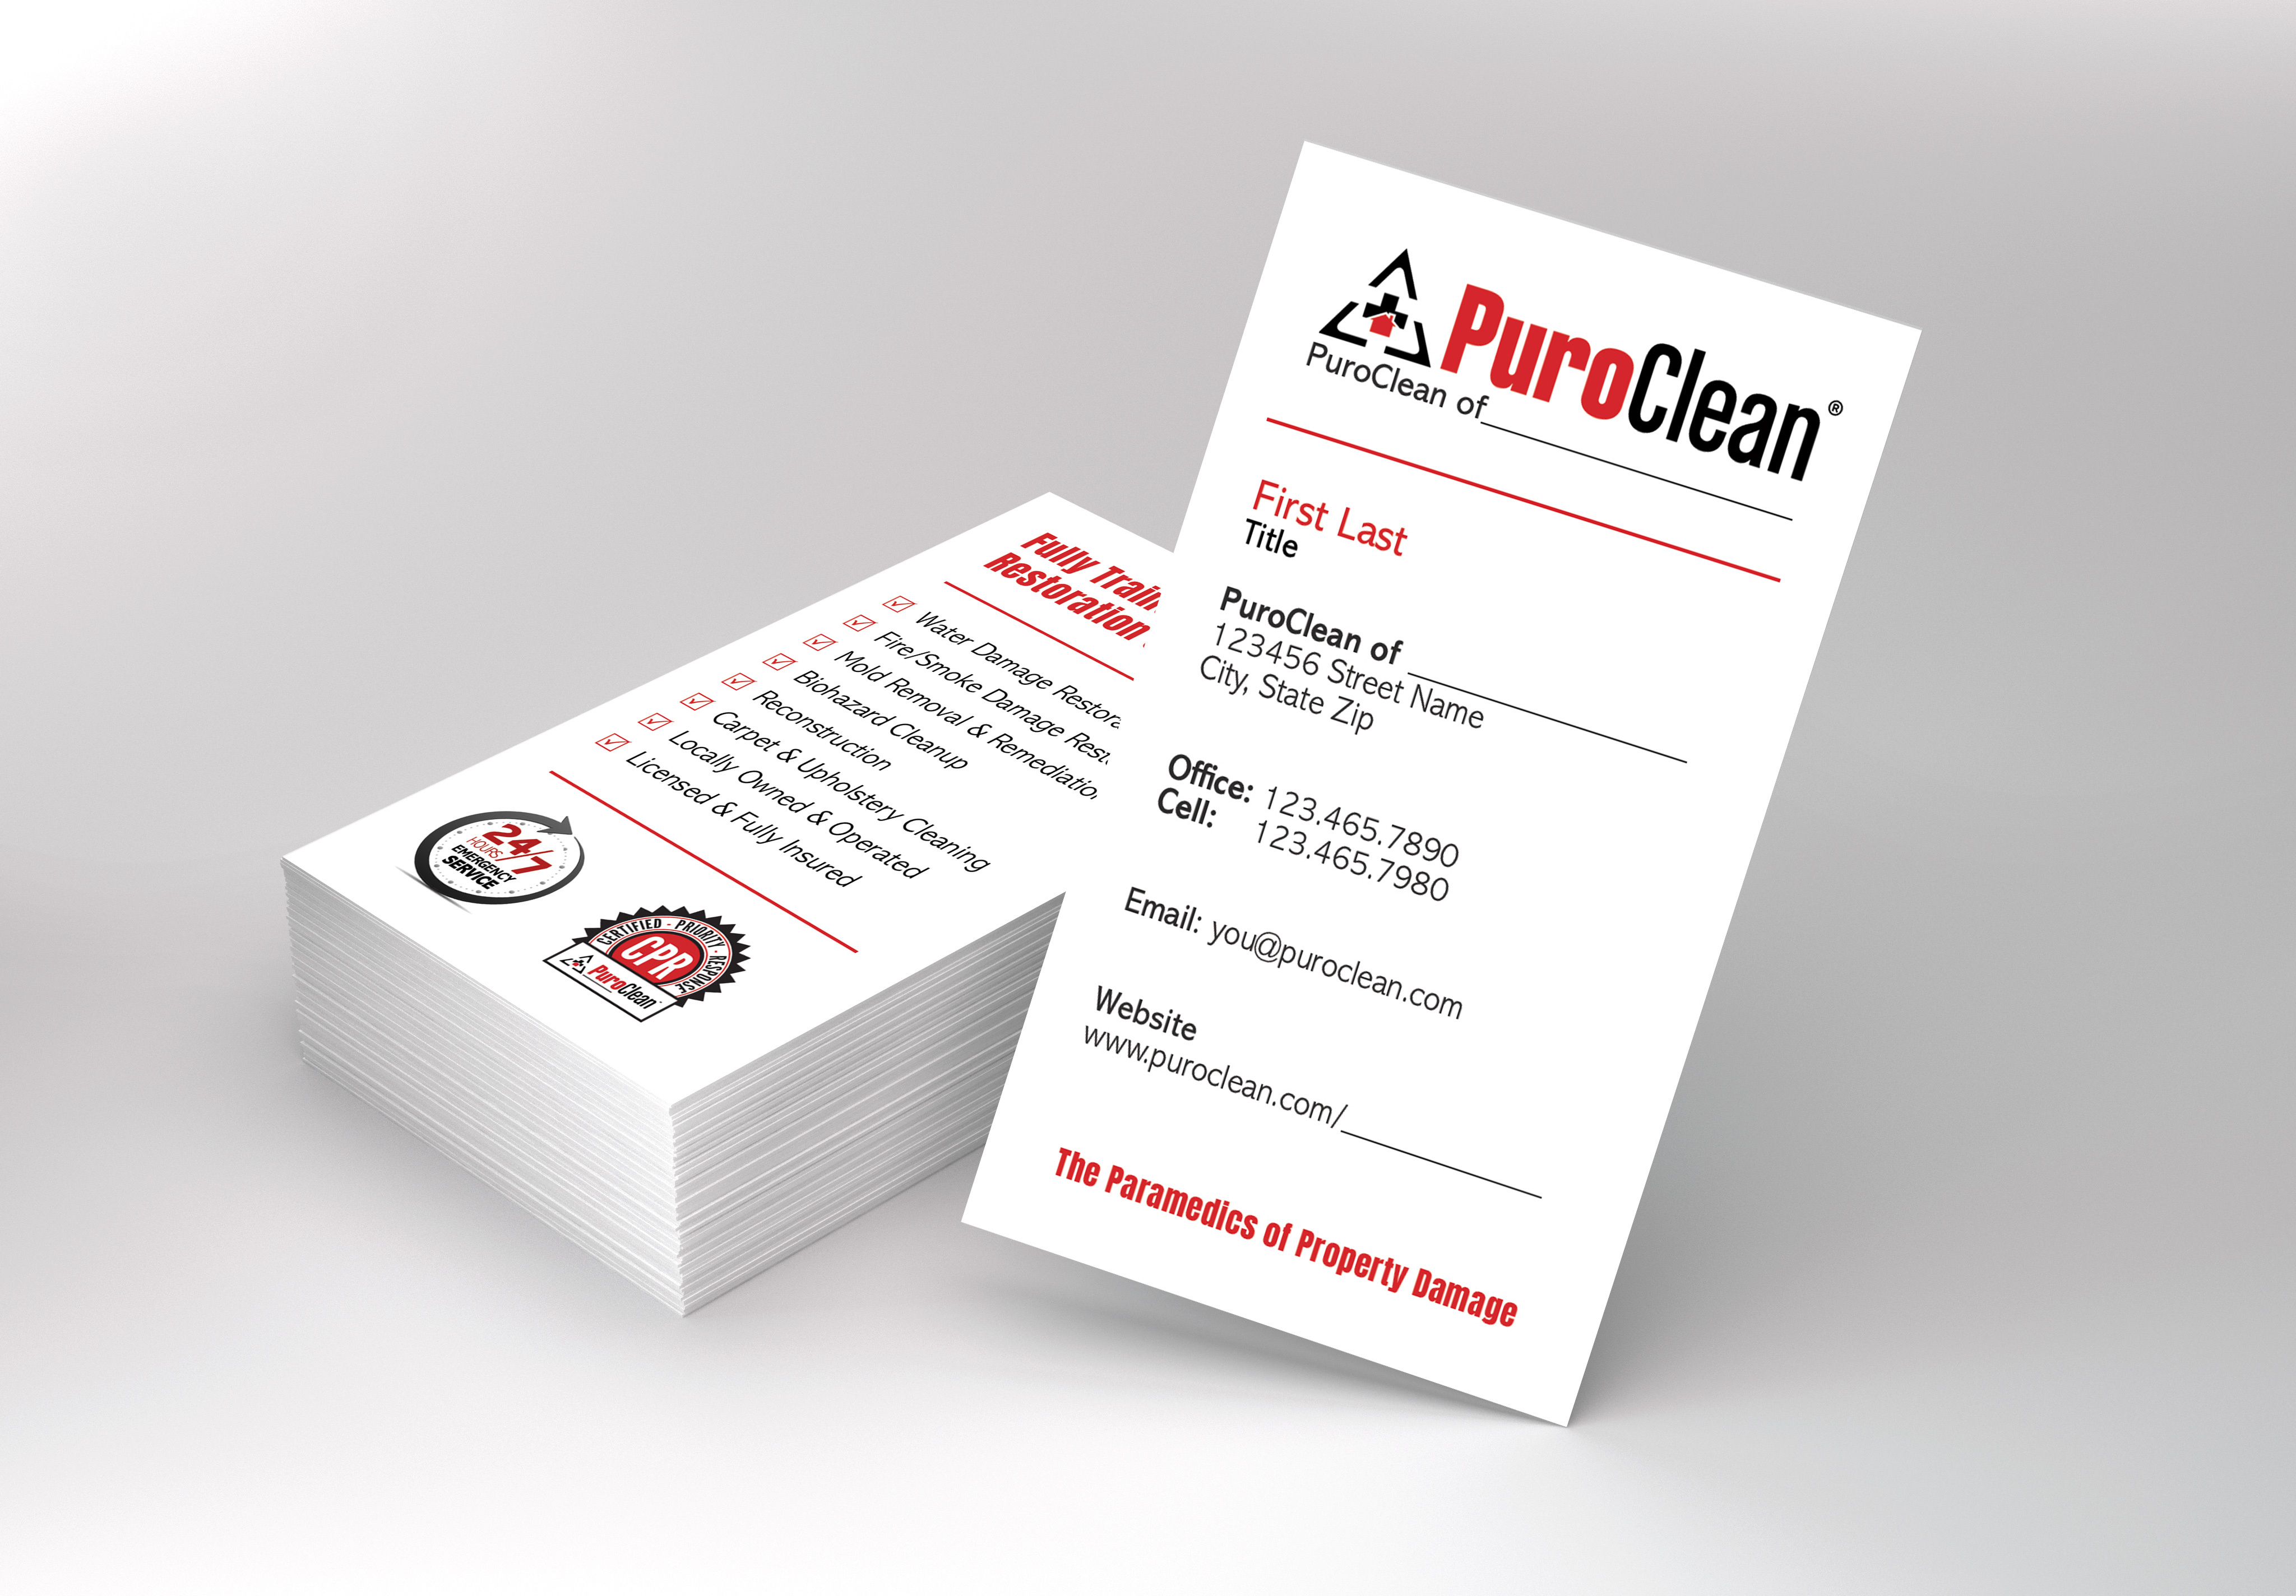 Business cards enable PuroClean technicians to easily provide contact info to storm victims in need of property restoration.